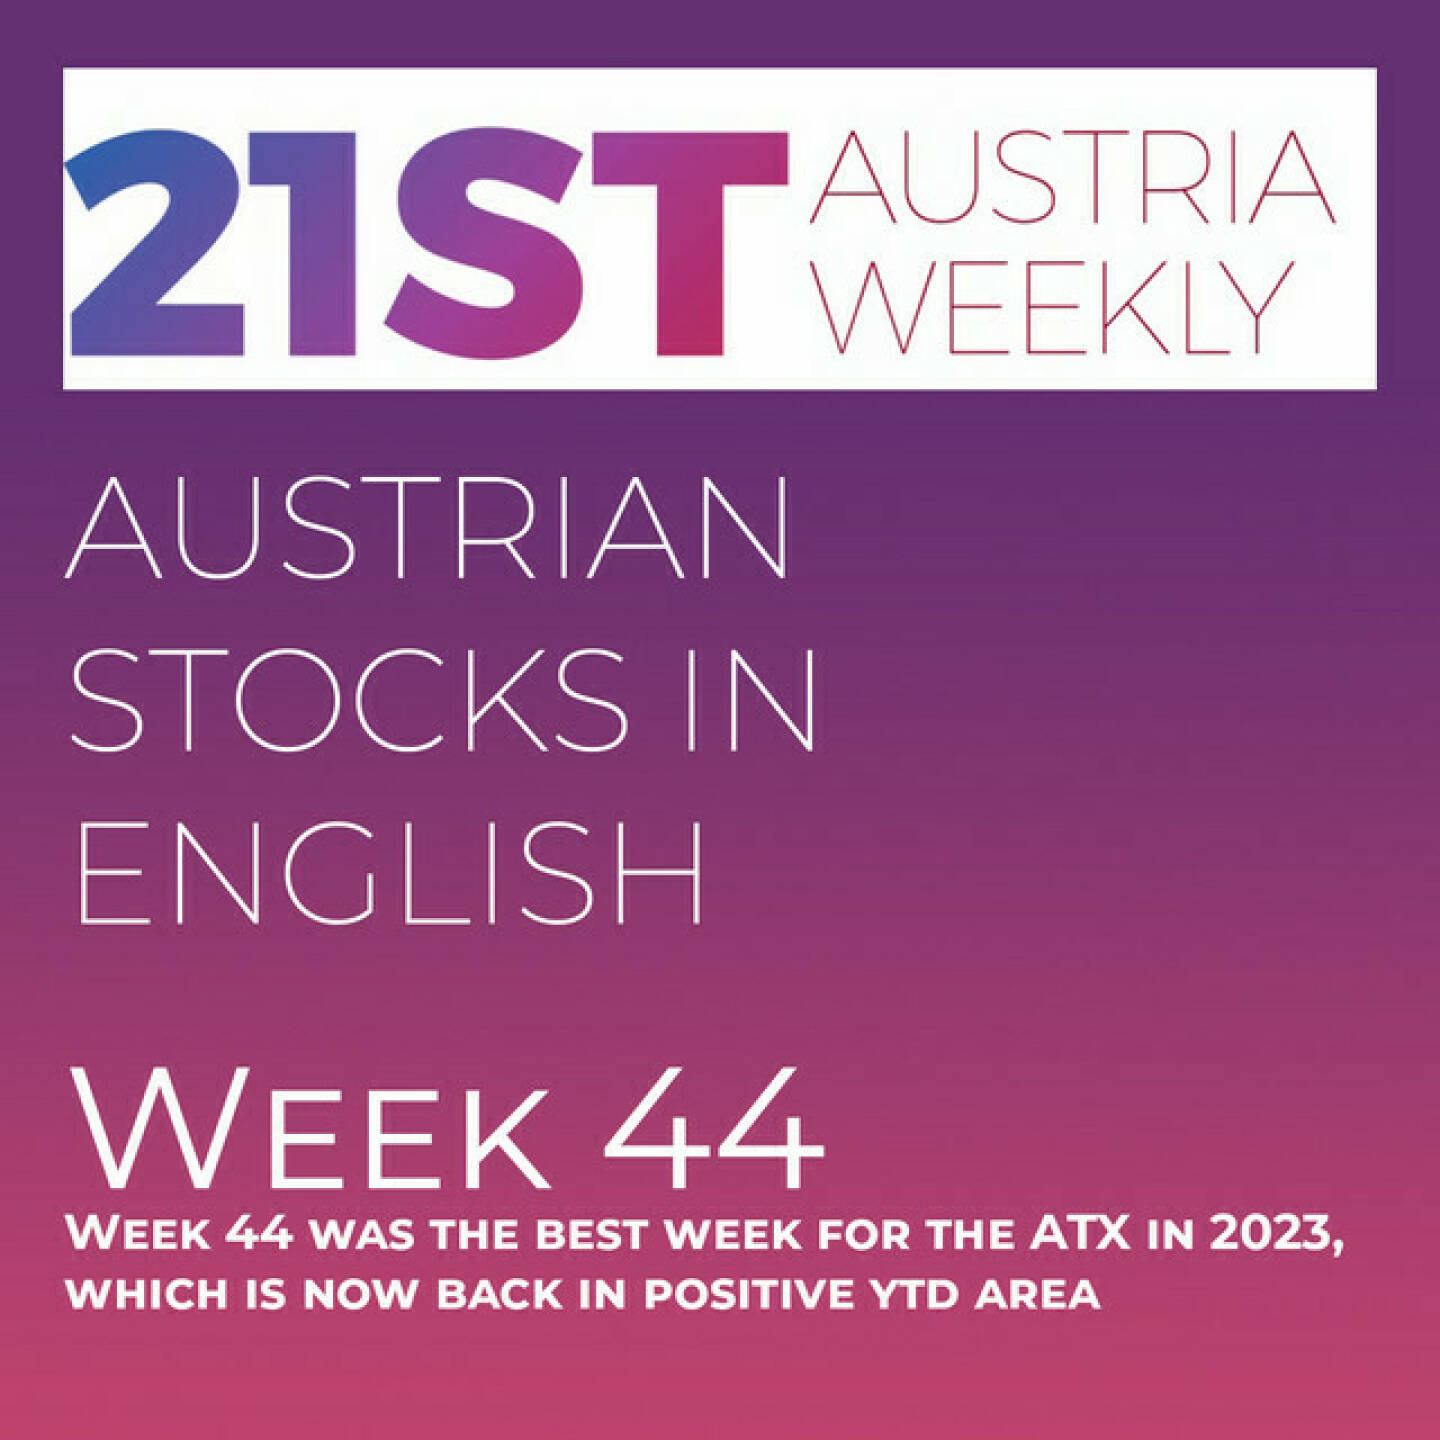 https://open.spotify.com/episode/58wtG9l4Fvhlgky416gT5w
Austrian Stocks in English: Week 44 was the best week for the ATX in 2023, which is now back in positive ytd area - <p>Welcome  to &#34;Austrian Stocks in English - presented by Palfinger&#34;, the english spoken weekly Summary for the Austrian Stock Market,  positioned every Sunday in the mostly german languaged Podcast &#34;Audio-CD.at Indie Podcasts&#34;- Wiener Börse, Sport Musik und Mehr“ .<br/><br/>The following script is based on our 21st Austria weekly and week 44 was the best week in 2023 with an ATX plus of 5,48 percent with AT&amp;S and Andritz 13 percent up. ATX is now back in positive year-to-date-area . News came from Erste Group, Palfinger, Frequentis (2), OMV, ams Osram, RHI Magnesita, Verbund, Andritz, AT&amp;S, Bawag, Lenzing, RBI, Kontron and voestalpine, spoken by the absolutely smart Alison.<br/><br/><a href=https://boerse-social.com/21staustria target=_blank>https://boerse-social.com/21staustria</a><br/><br/><a href=https://www.audio-cd.at/search/austrian%20stocks%20in%20english target=_blank>https://www.audio-cd.at/search/austrian%20stocks%20in%20english</a><br/><br/>30x30 Finanzwissen pur für Österreich auf Spotify spoken by Alison:: <a href=https://open.spotify.com/playlist/3MfSMoCXAJMdQGwjpjgmLm target=_blank>https://open.spotify.com/playlist/3MfSMoCXAJMdQGwjpjgmLm</a><br/><br/>Please rate my Podcast on Apple Podcasts (or Spotify): <a href=https://podcasts.apple.com/at/podcast/audio-cd-at-indie-podcasts-wiener-boerse-sport-musik-und-mehr/id1484919130 target=_blank>https://podcasts.apple.com/at/podcast/audio-cd-at-indie-podcasts-wiener-boerse-sport-musik-und-mehr/id1484919130</a> .And please spread the word : <a href=https://www.boerse-social.com/21staustria target=_blank>https://www.boerse-social.com/21staustria</a> - the address to subscribe to the weekly summary as a PDF.</p>